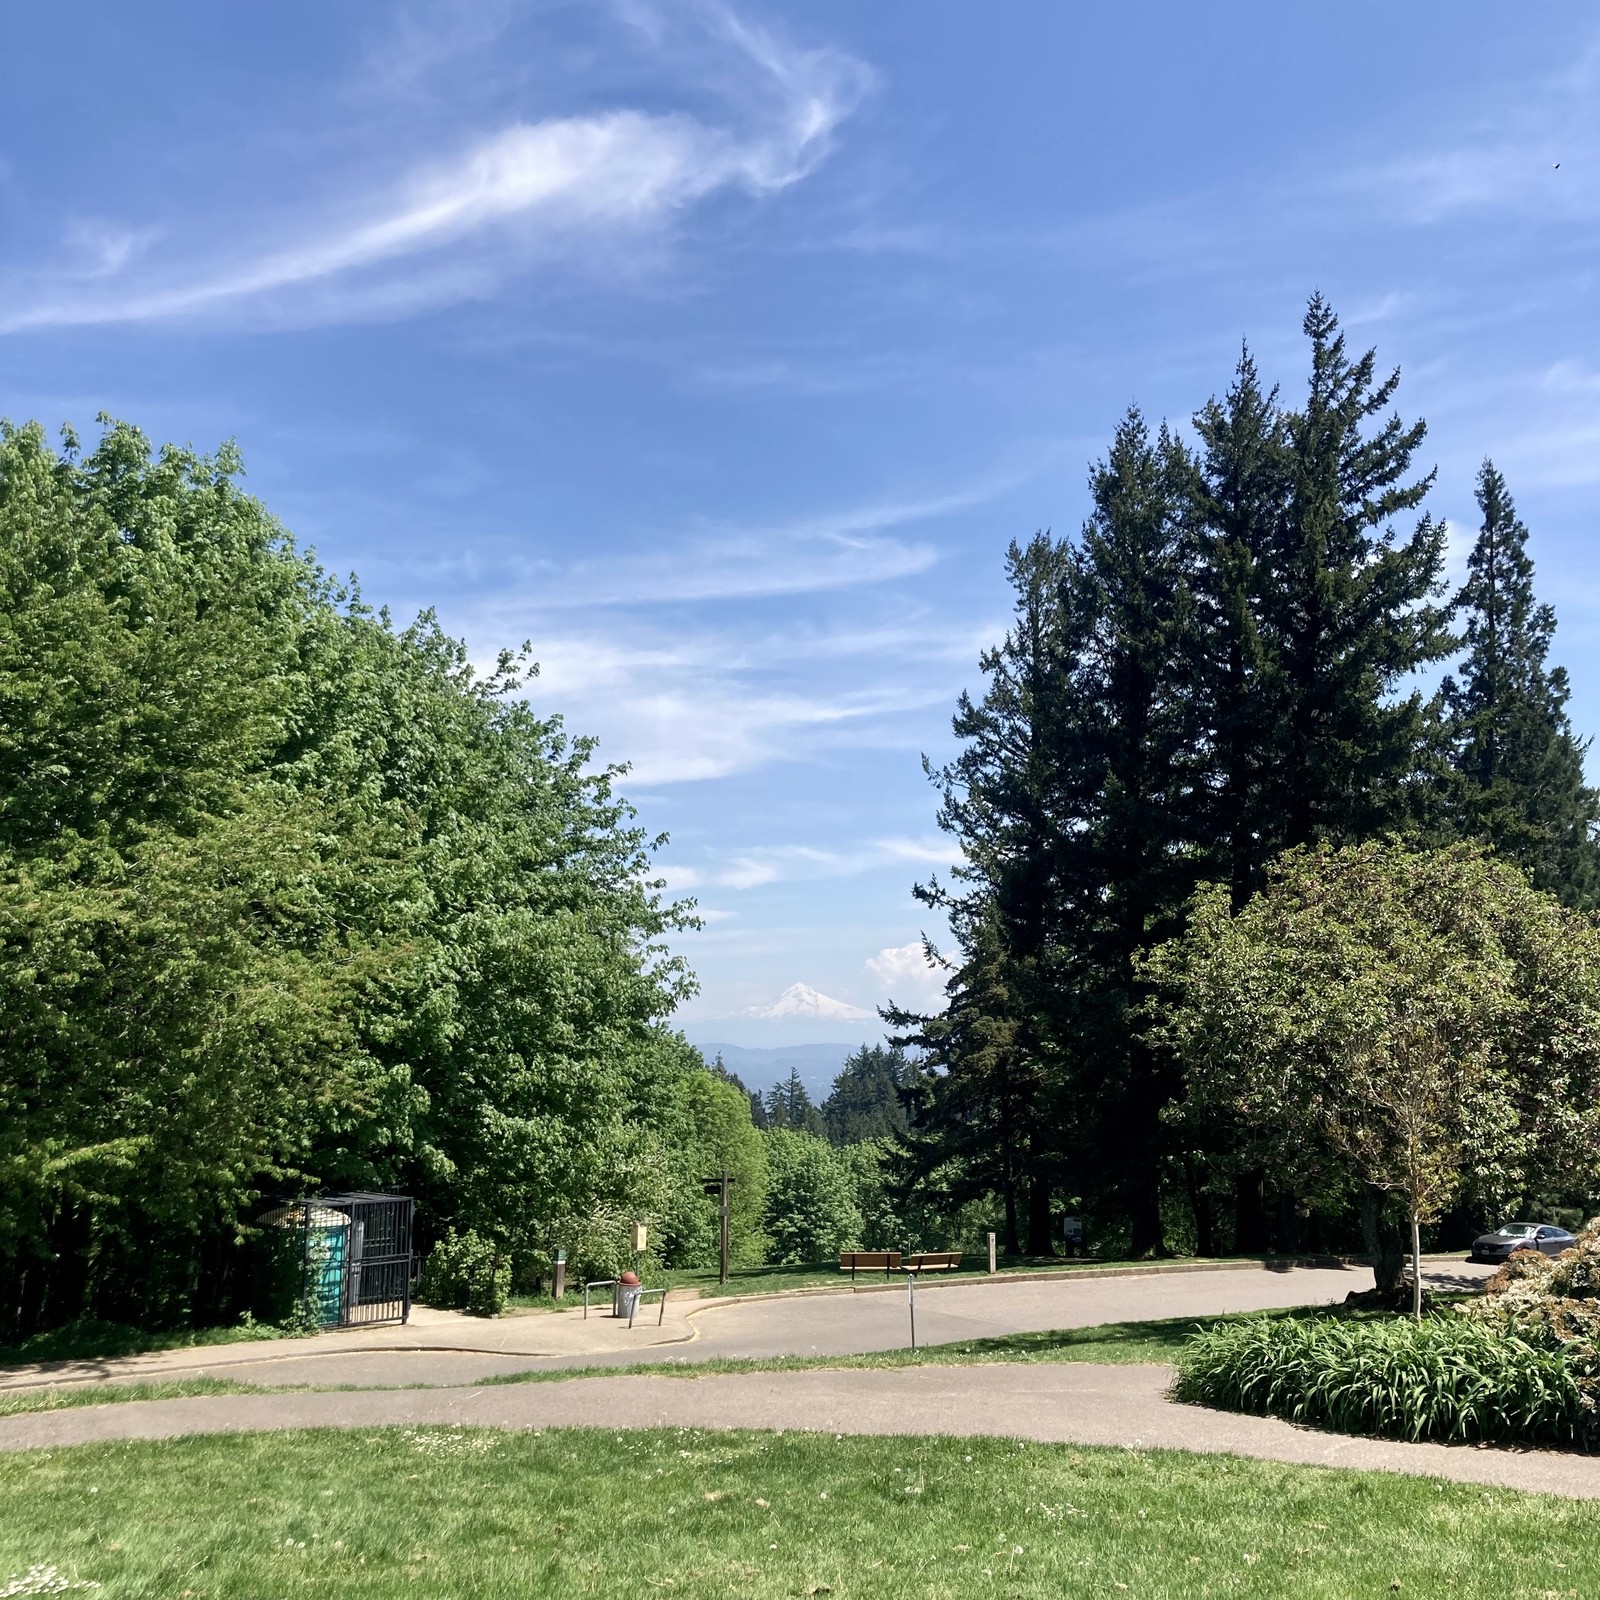 Mt. Hood, seen from Council Crest Park, under a clear sky but hazy at low elevations due to smoke blowing south from a large apartment fire earlier today in Goose Hollow. A single thunderhead is over the southern shoulder of the mountain, perhaps hundreds of miles distant